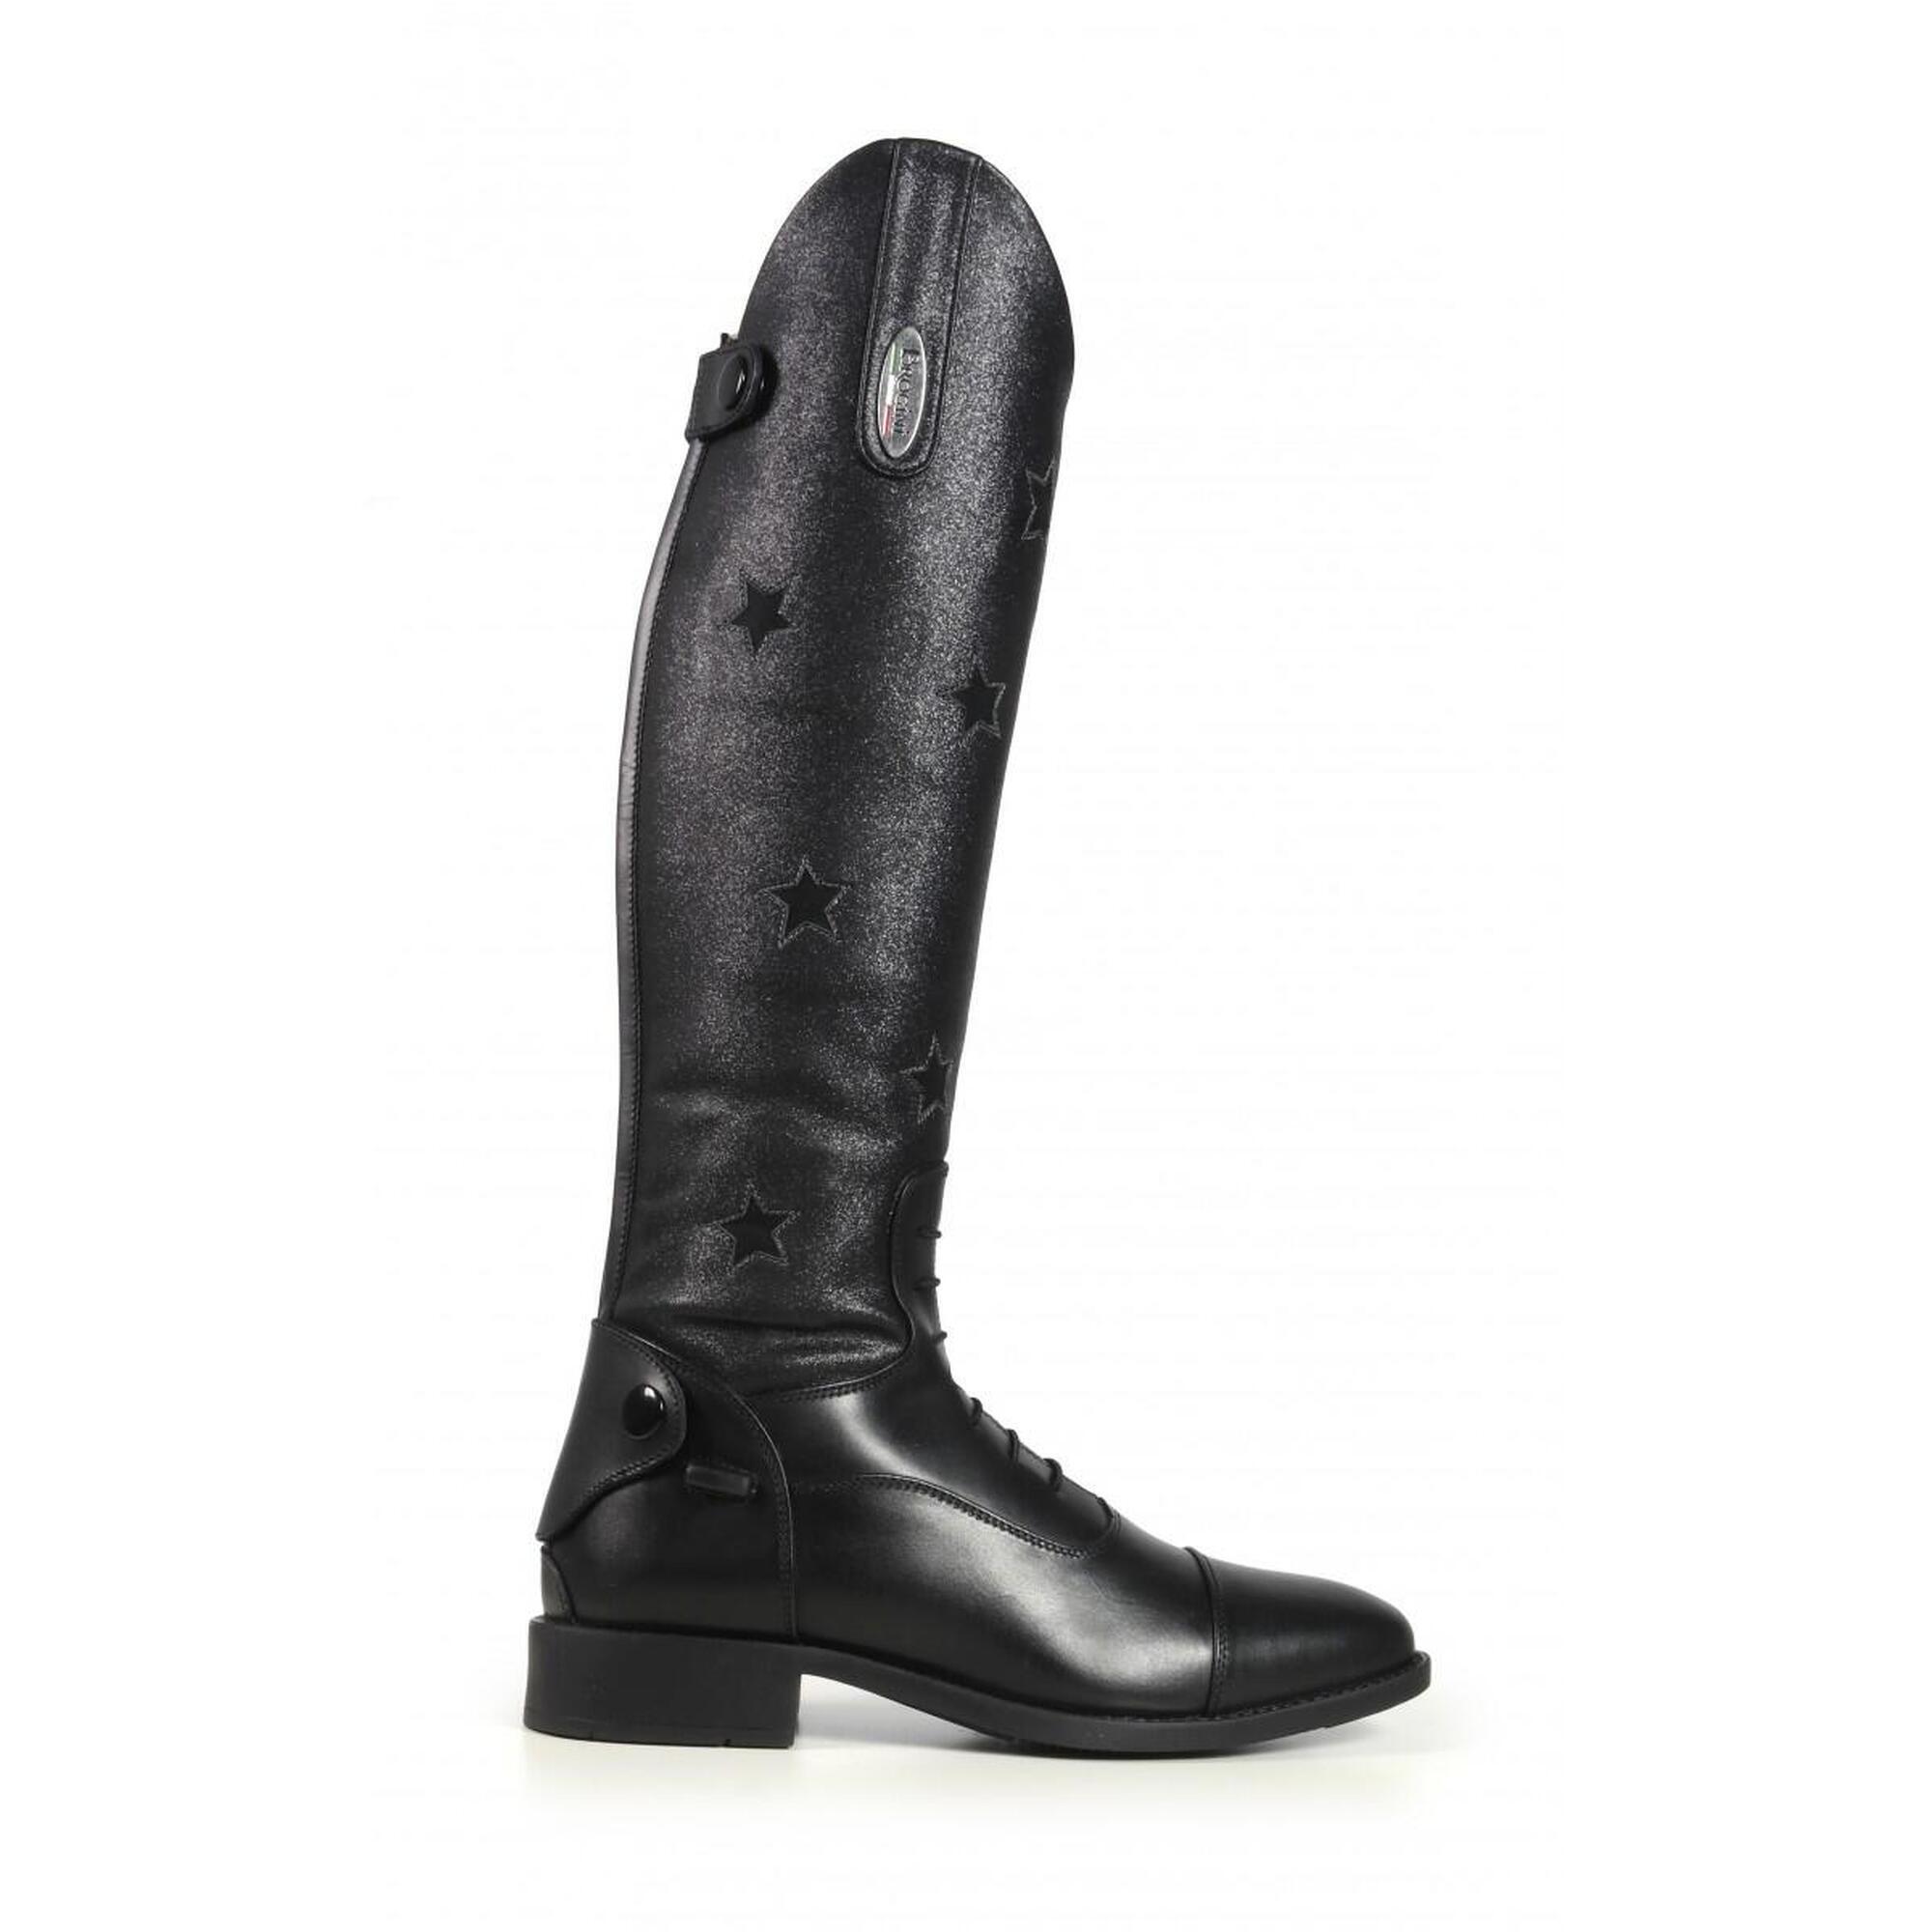 Carina Piccino Childs Long Riding Boots- Wide Calf Fit 1/4